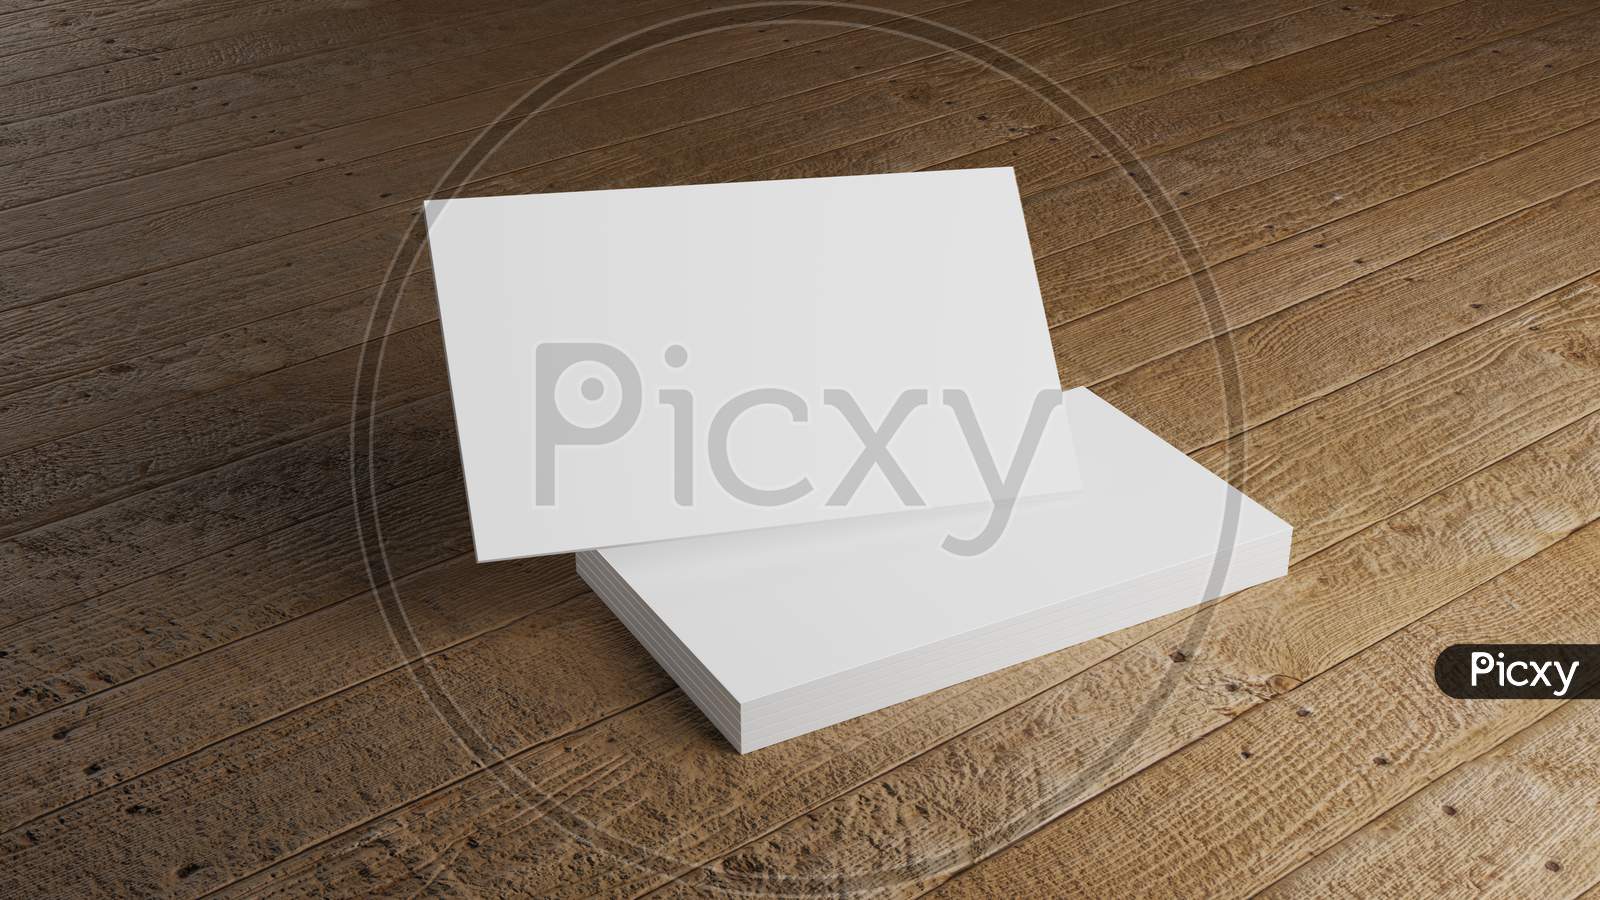 White Business Card Mockup Stacking On Wooden Table. Office Supply Object Background Concept For Brand Presentation Template Print. 3.5 X 2 Inch Paper Size Empty Blank Cover. 3D Illustration Rendering